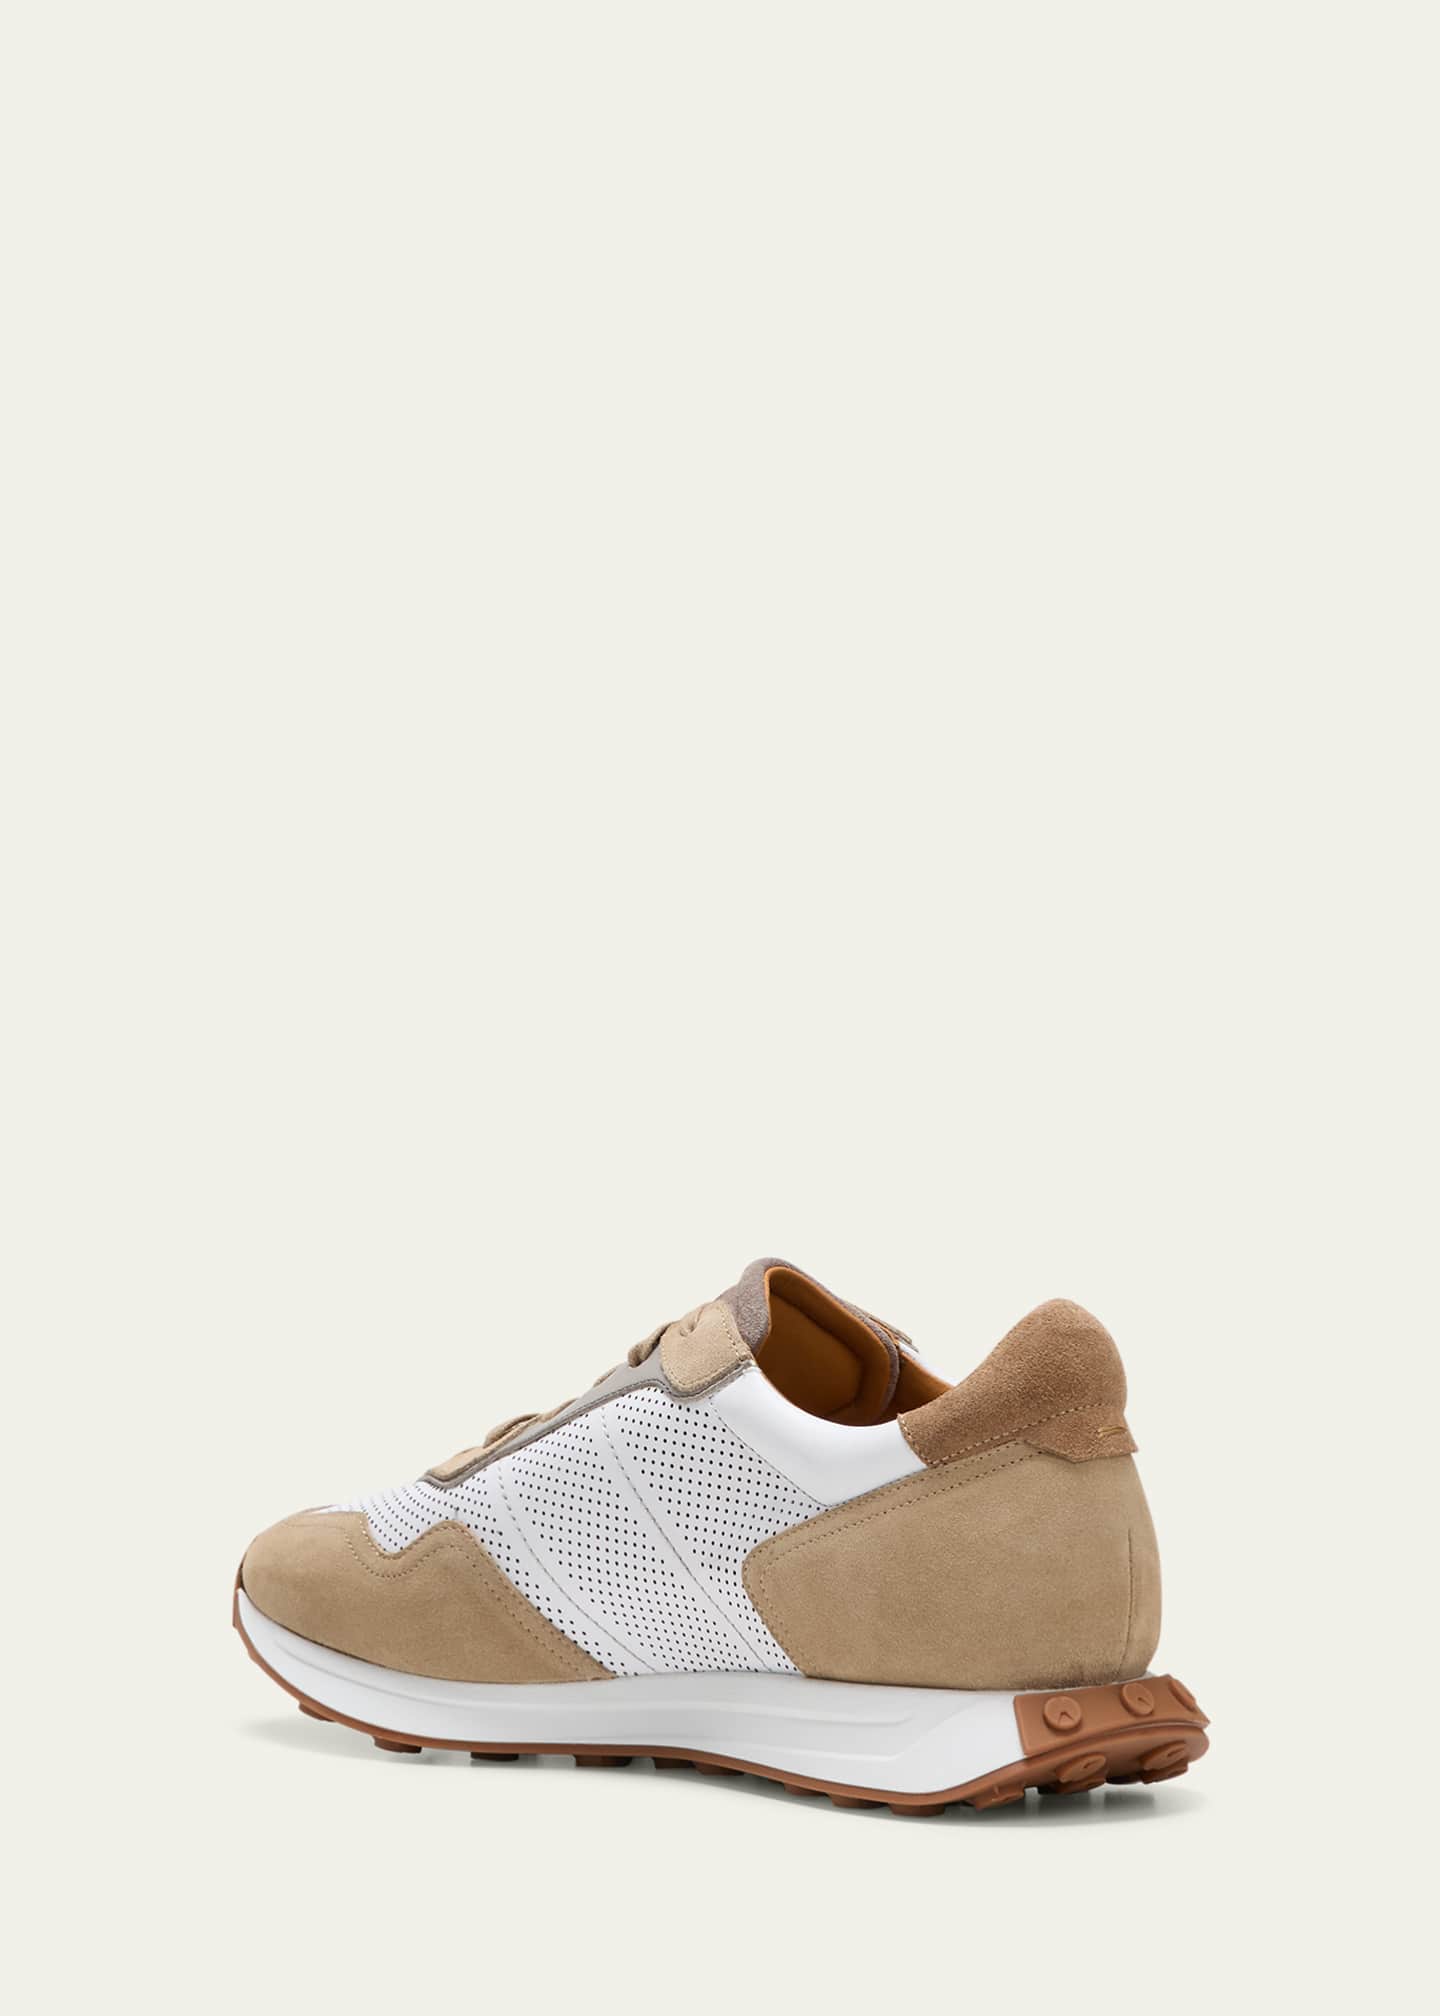 Magnanni Men's Romero Leather and Suede Runner Sneakers - Bergdorf Goodman